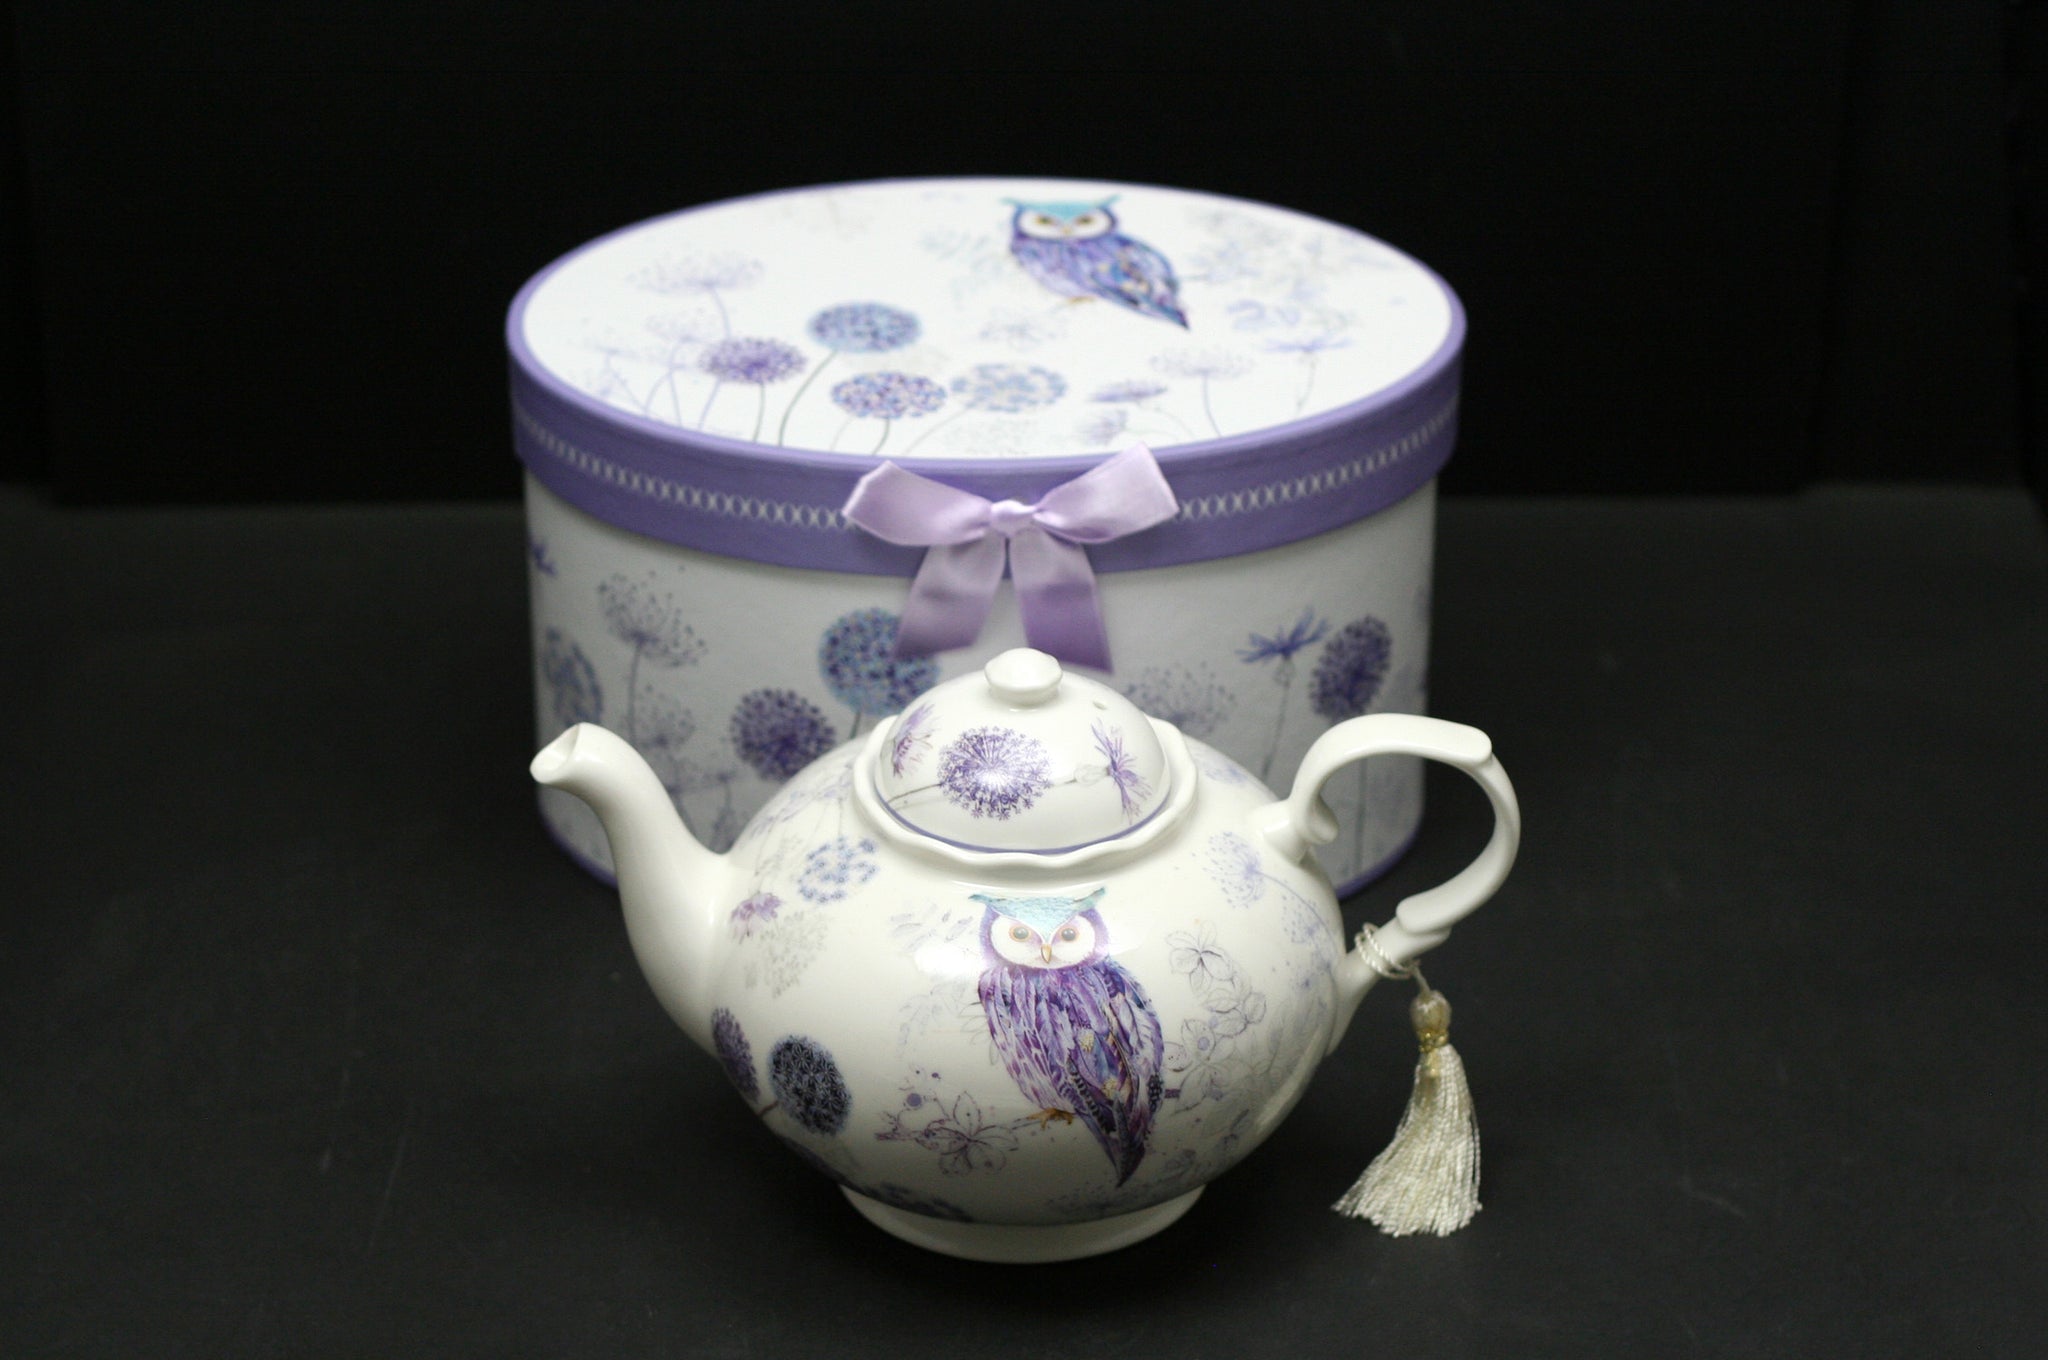 Purple Owl Design Teapot with a Ribboned Gift Box (1000 ml)